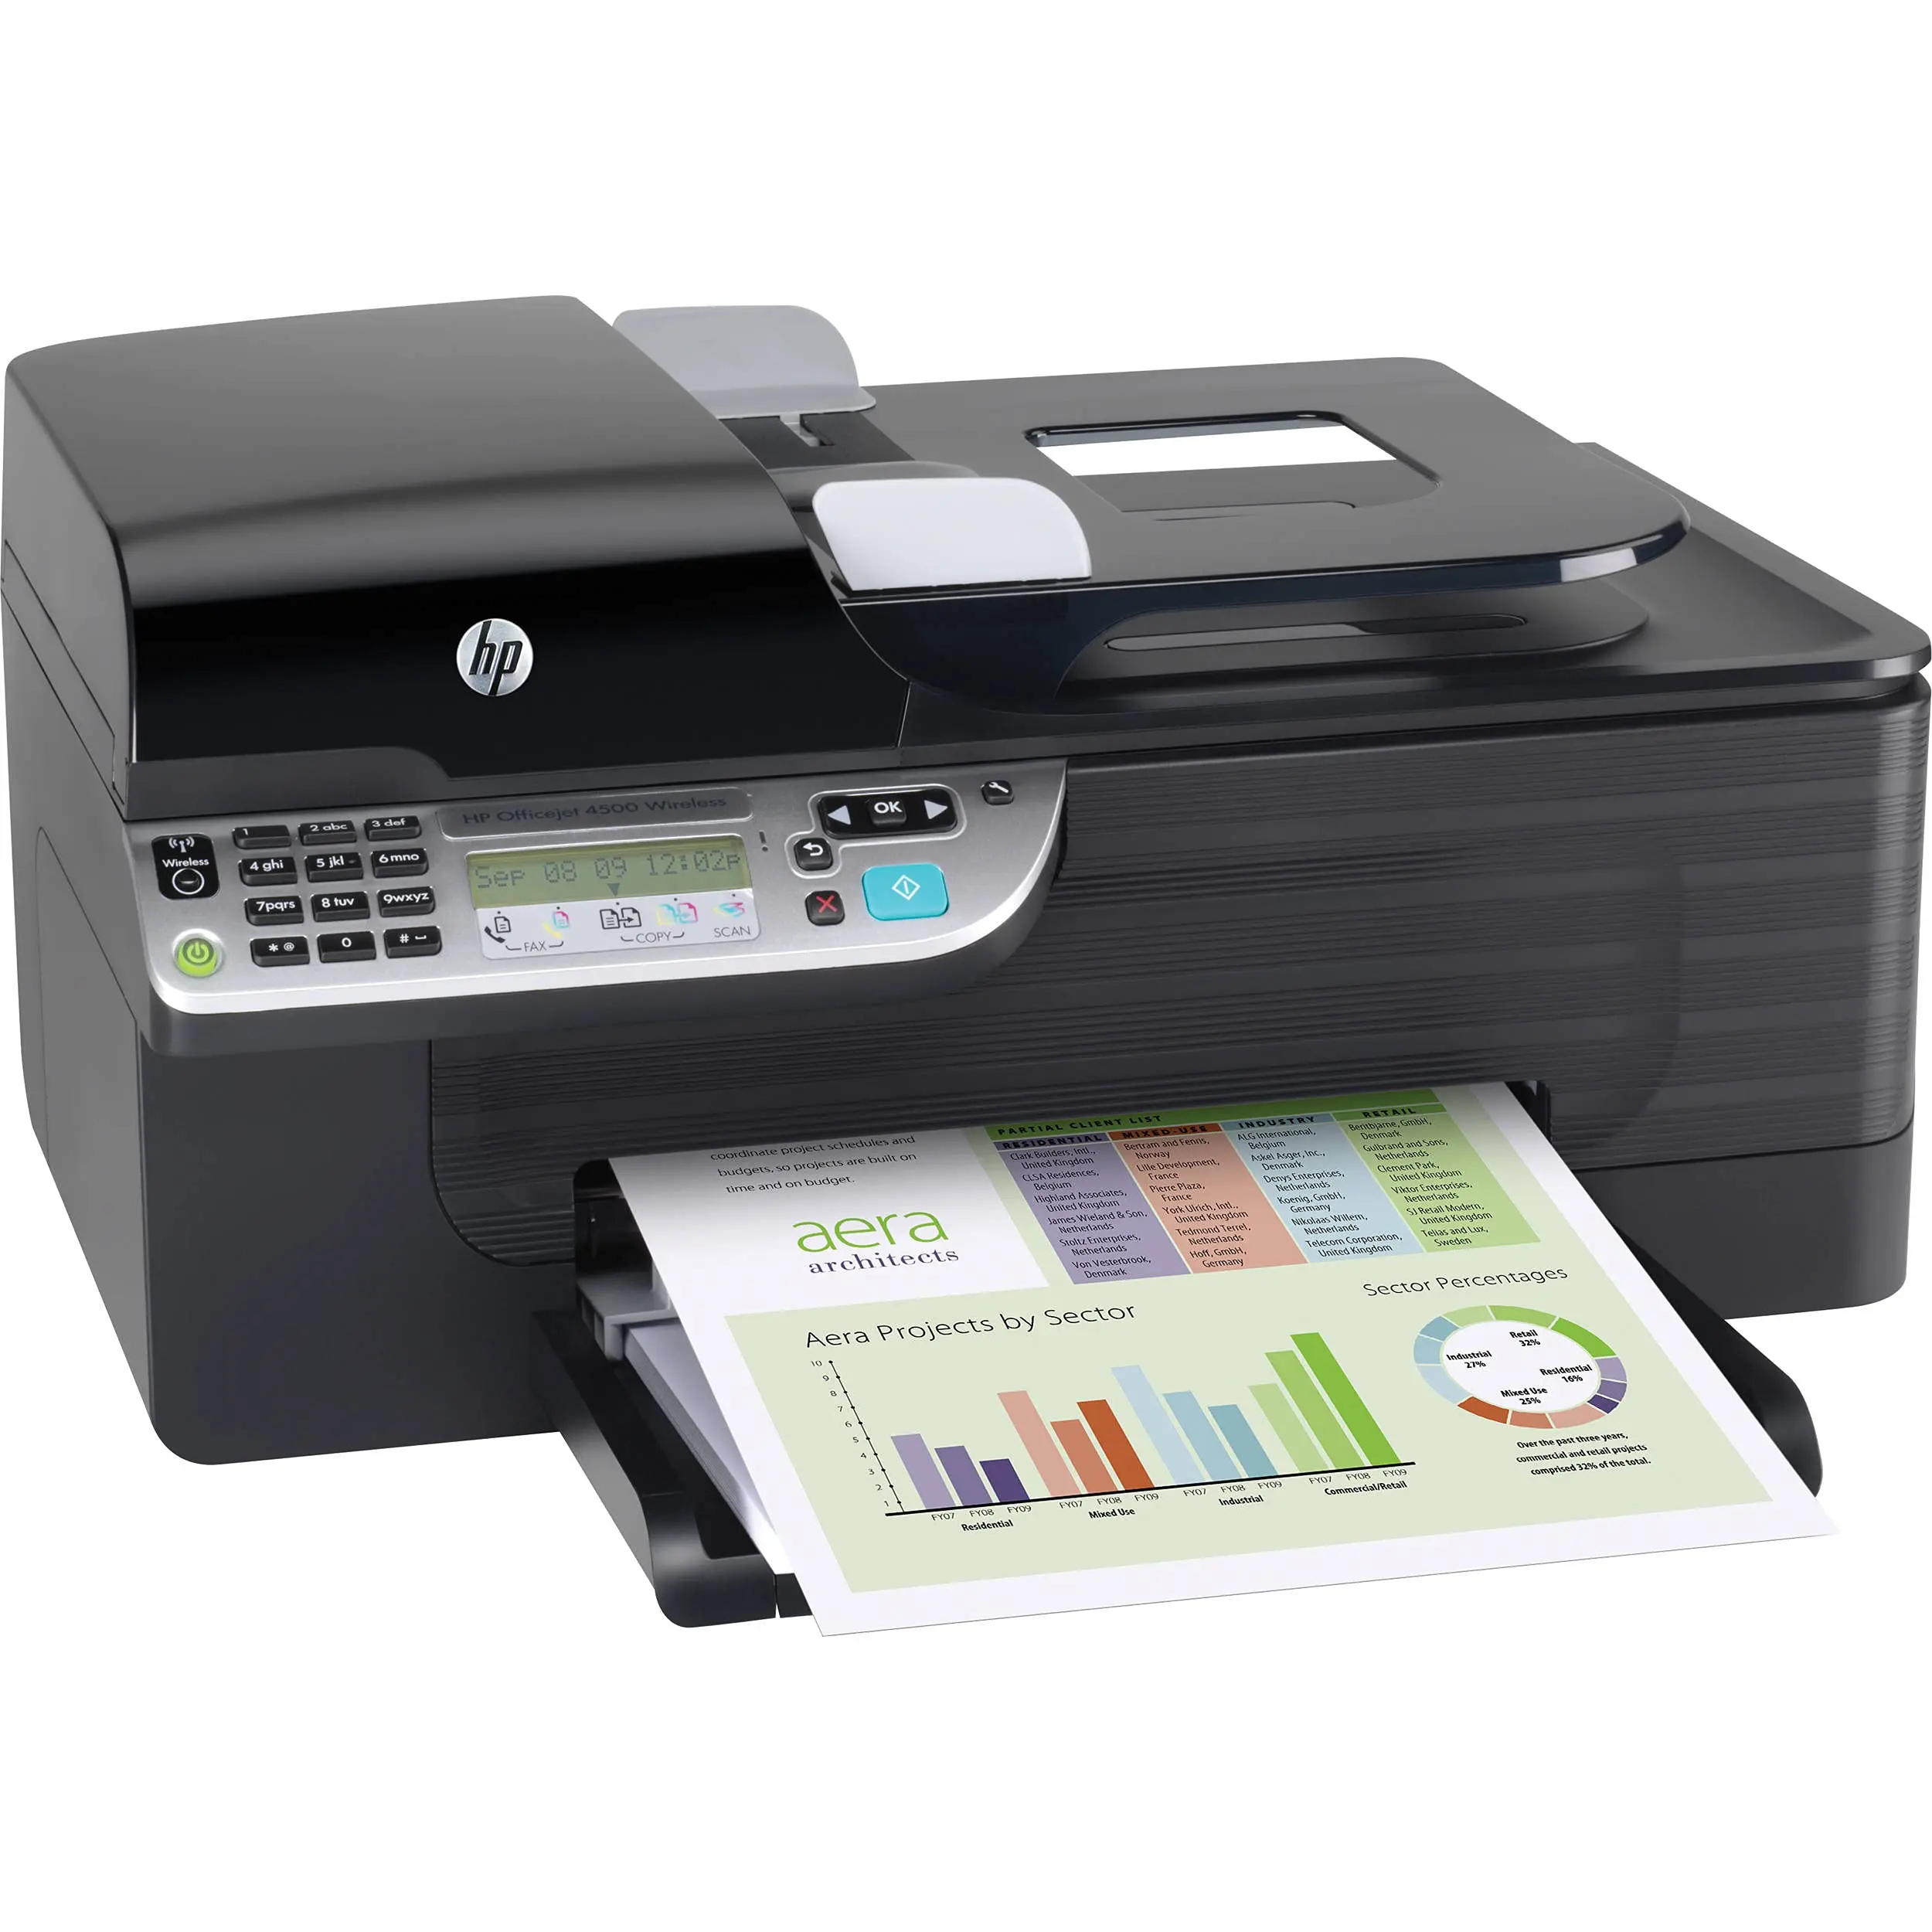 Hp officejet 4500 wireless printer: reviews & key features